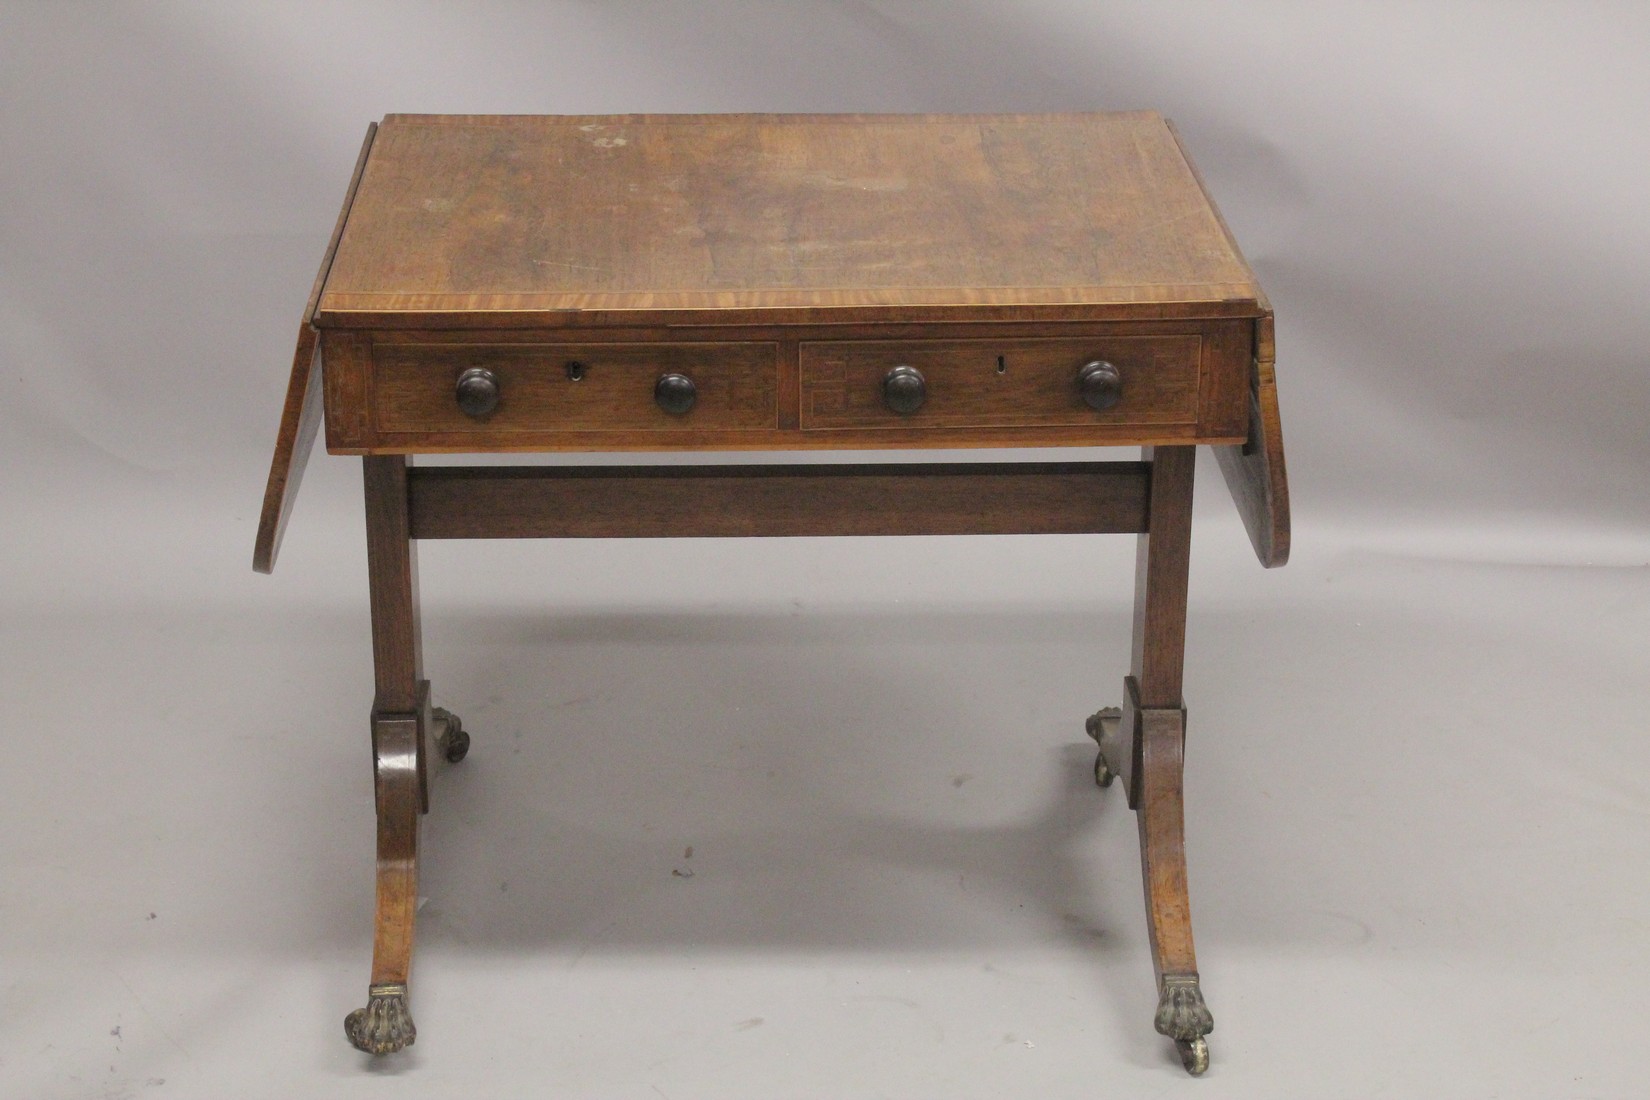 A REGENCY ROSEWOOD SOFA TABLE with folding flaps, on curving legs with casters. 4ft 4ins long